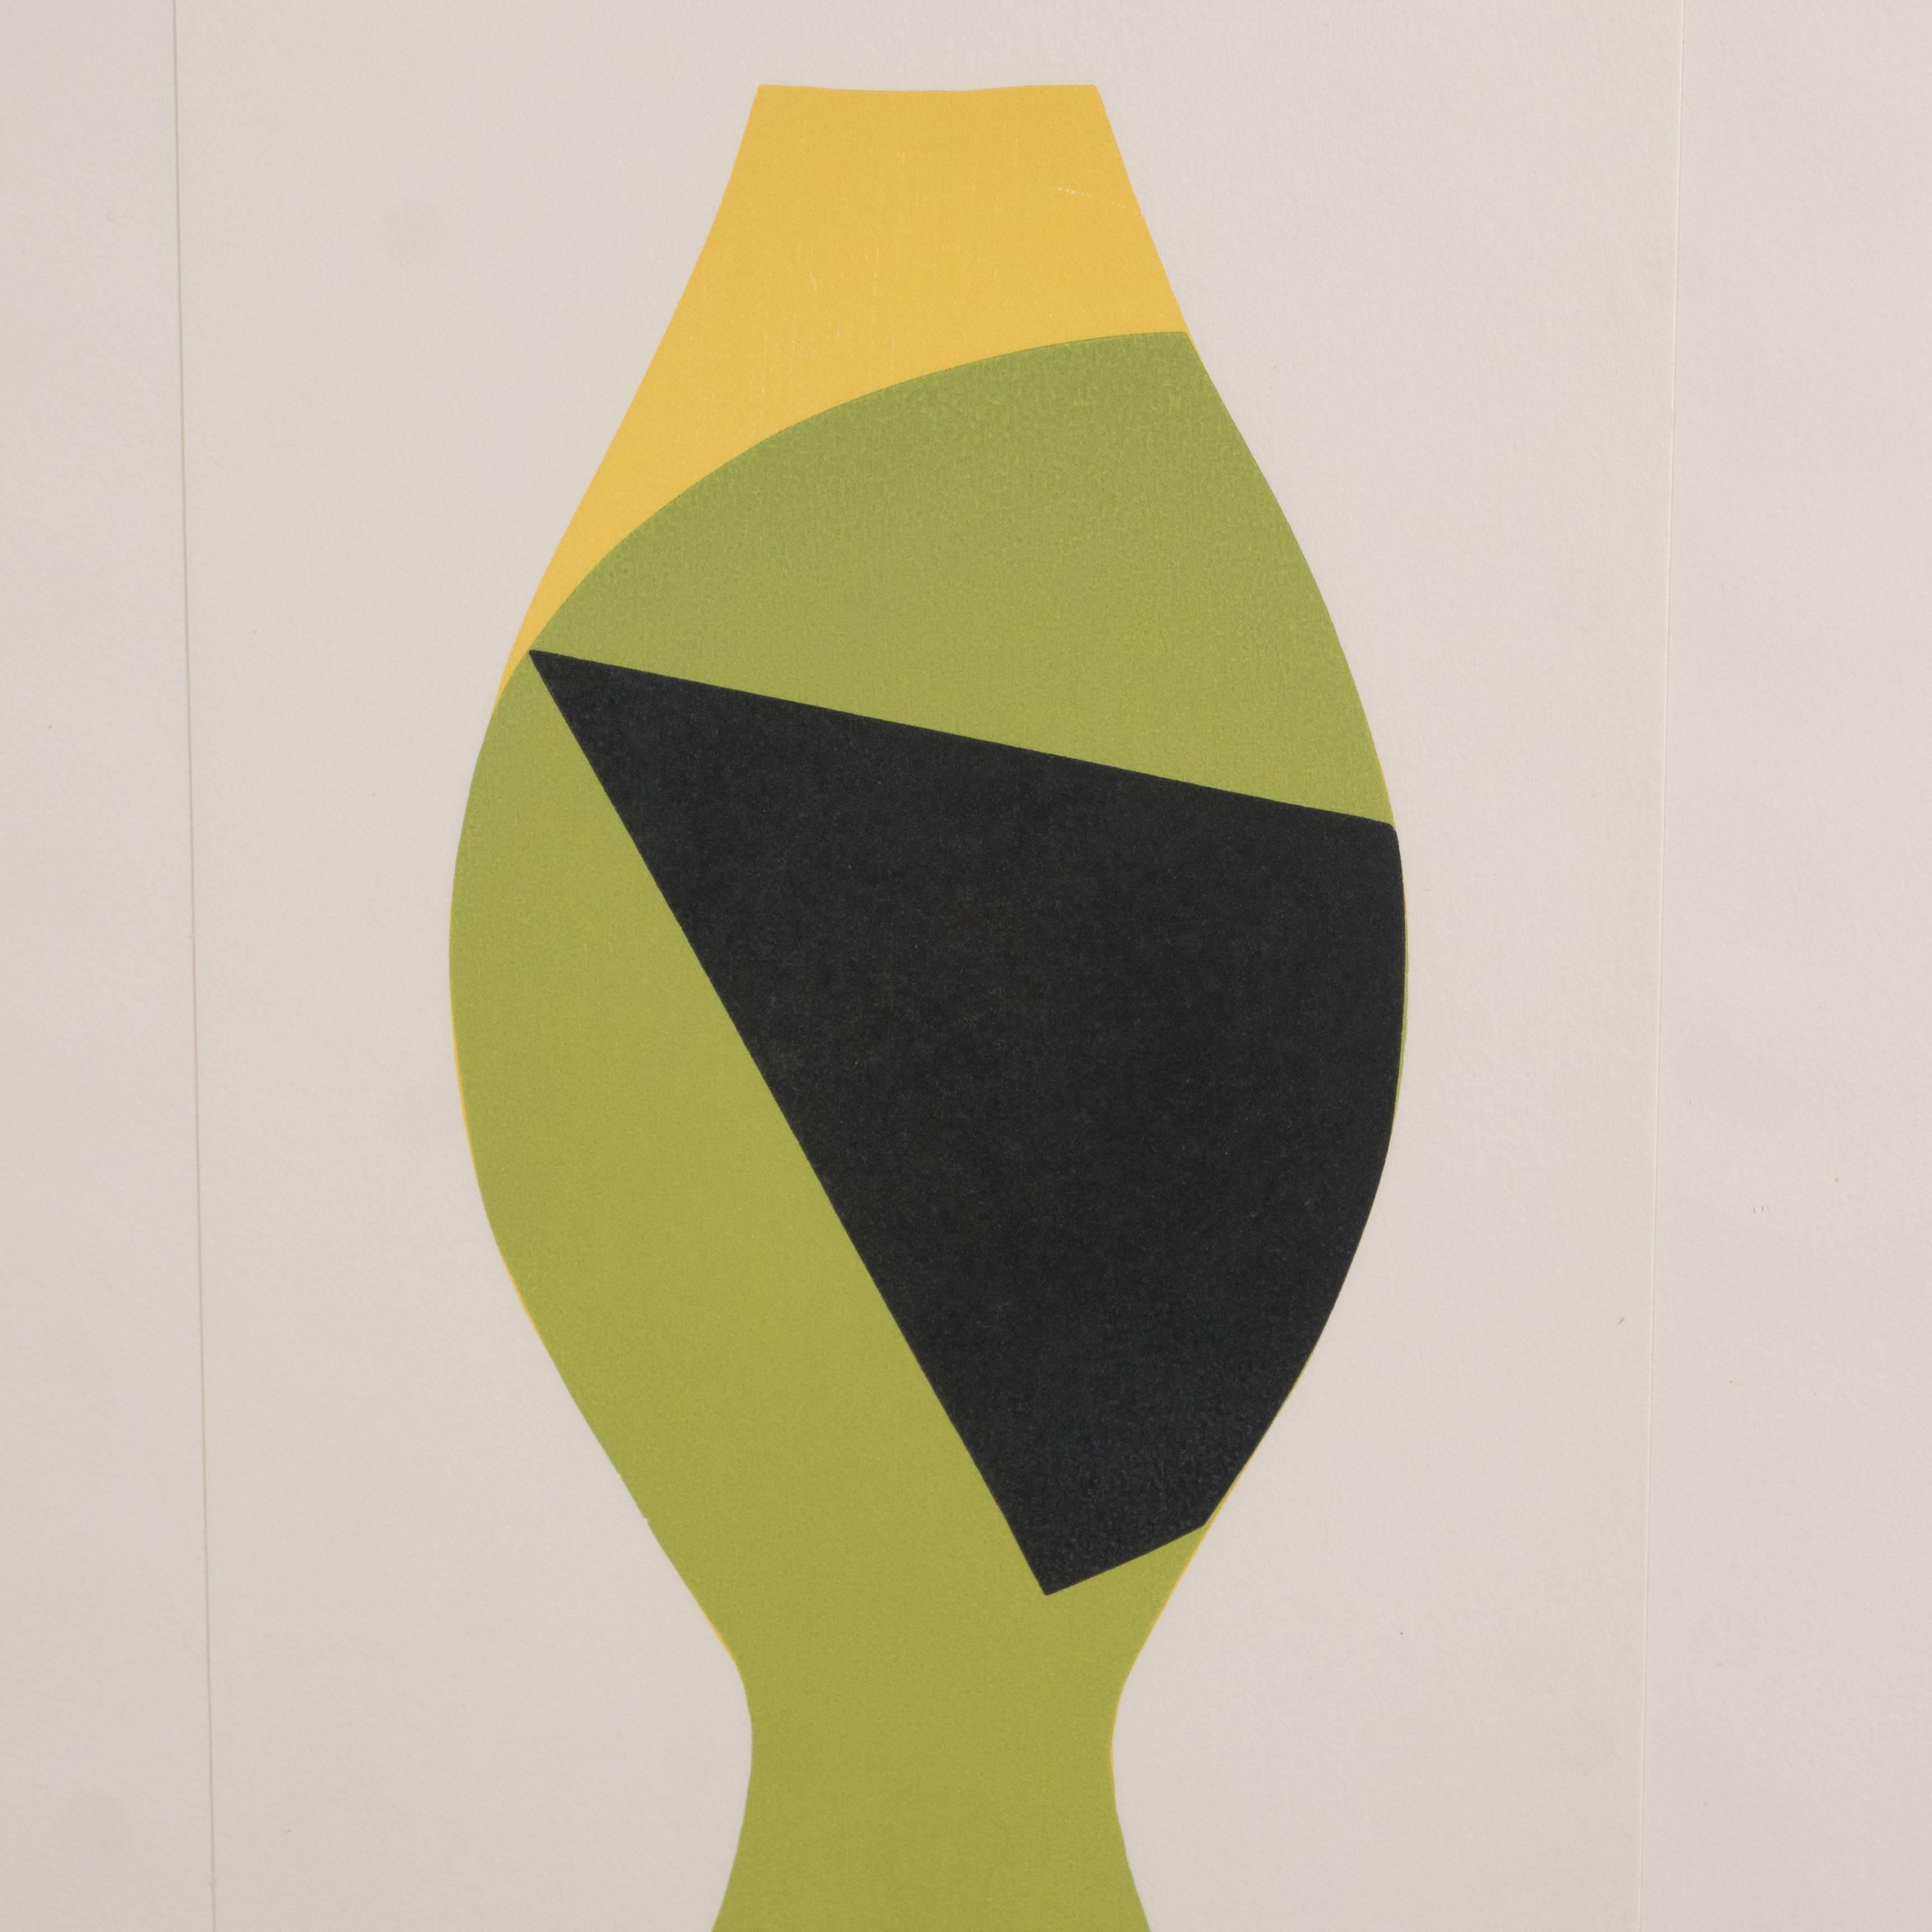 Hans Arp Poupee sans Tete (A.243),
1964.
Signed in pencil and numbered 23/100.
Woodcut printed in colors.

Depicting an abstract head of a doll in a cubist color combination of yellow, green and black.
Framed in a gallery style walnut frame